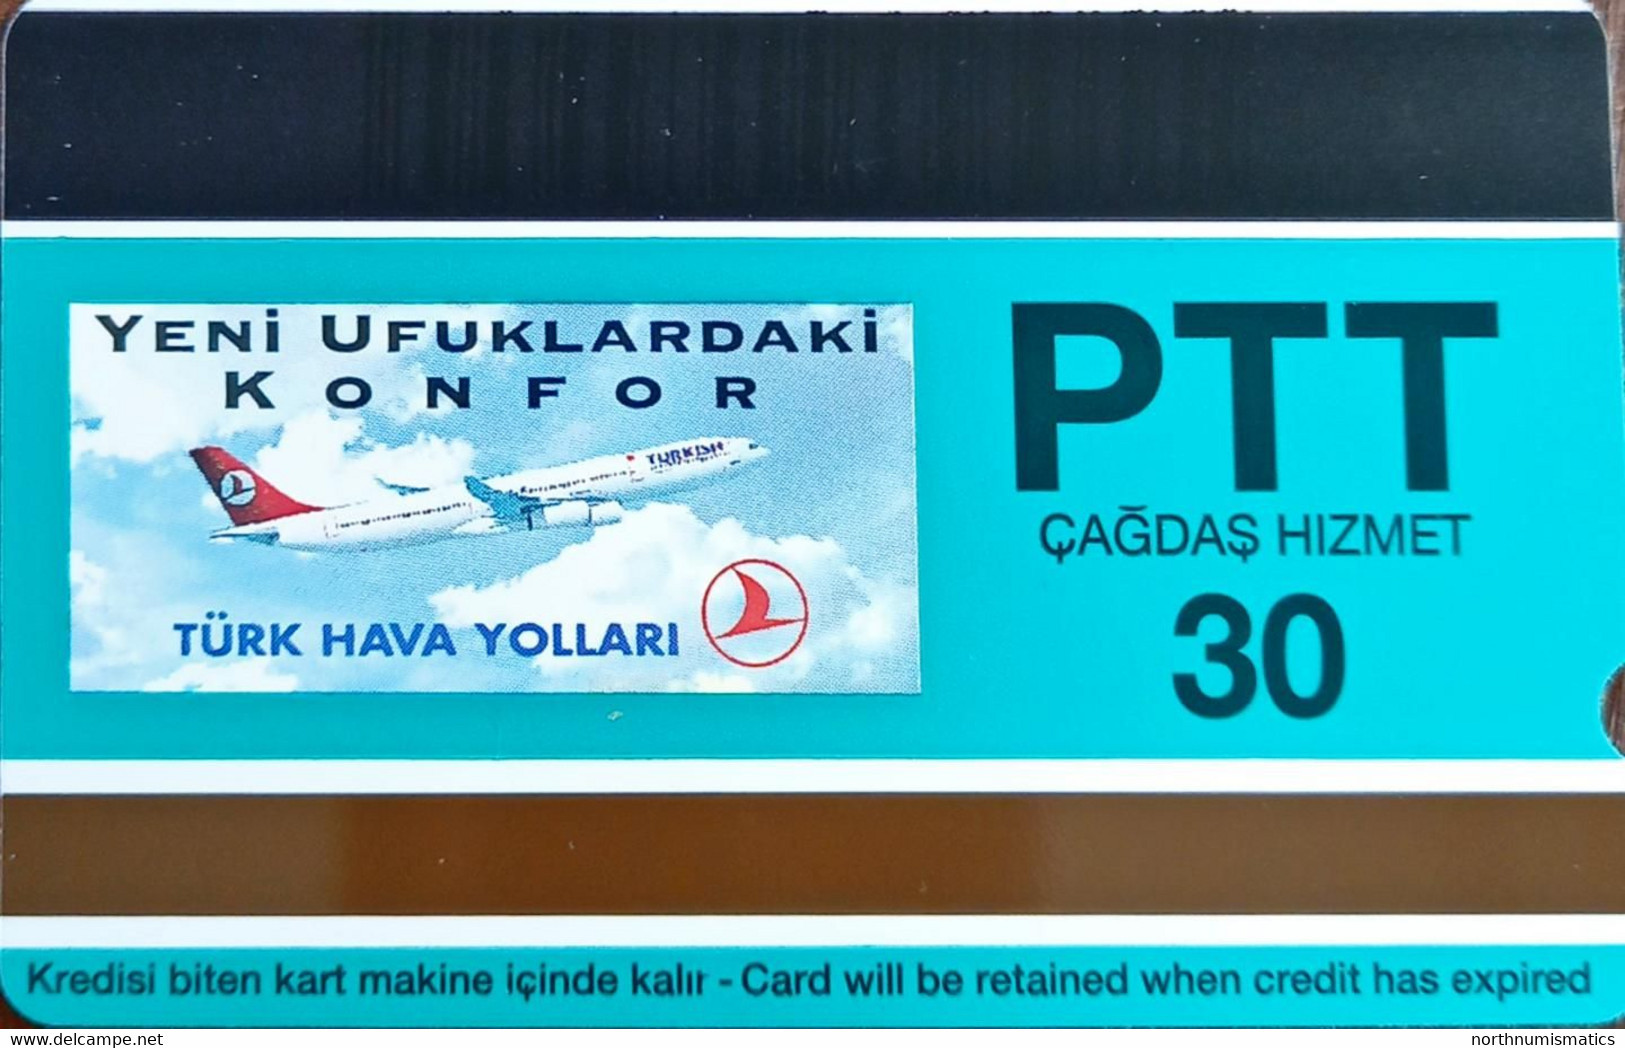 Turkey Phonecards THY Aircafts Dragon Rapid PTT 30 Units Unc - Collections